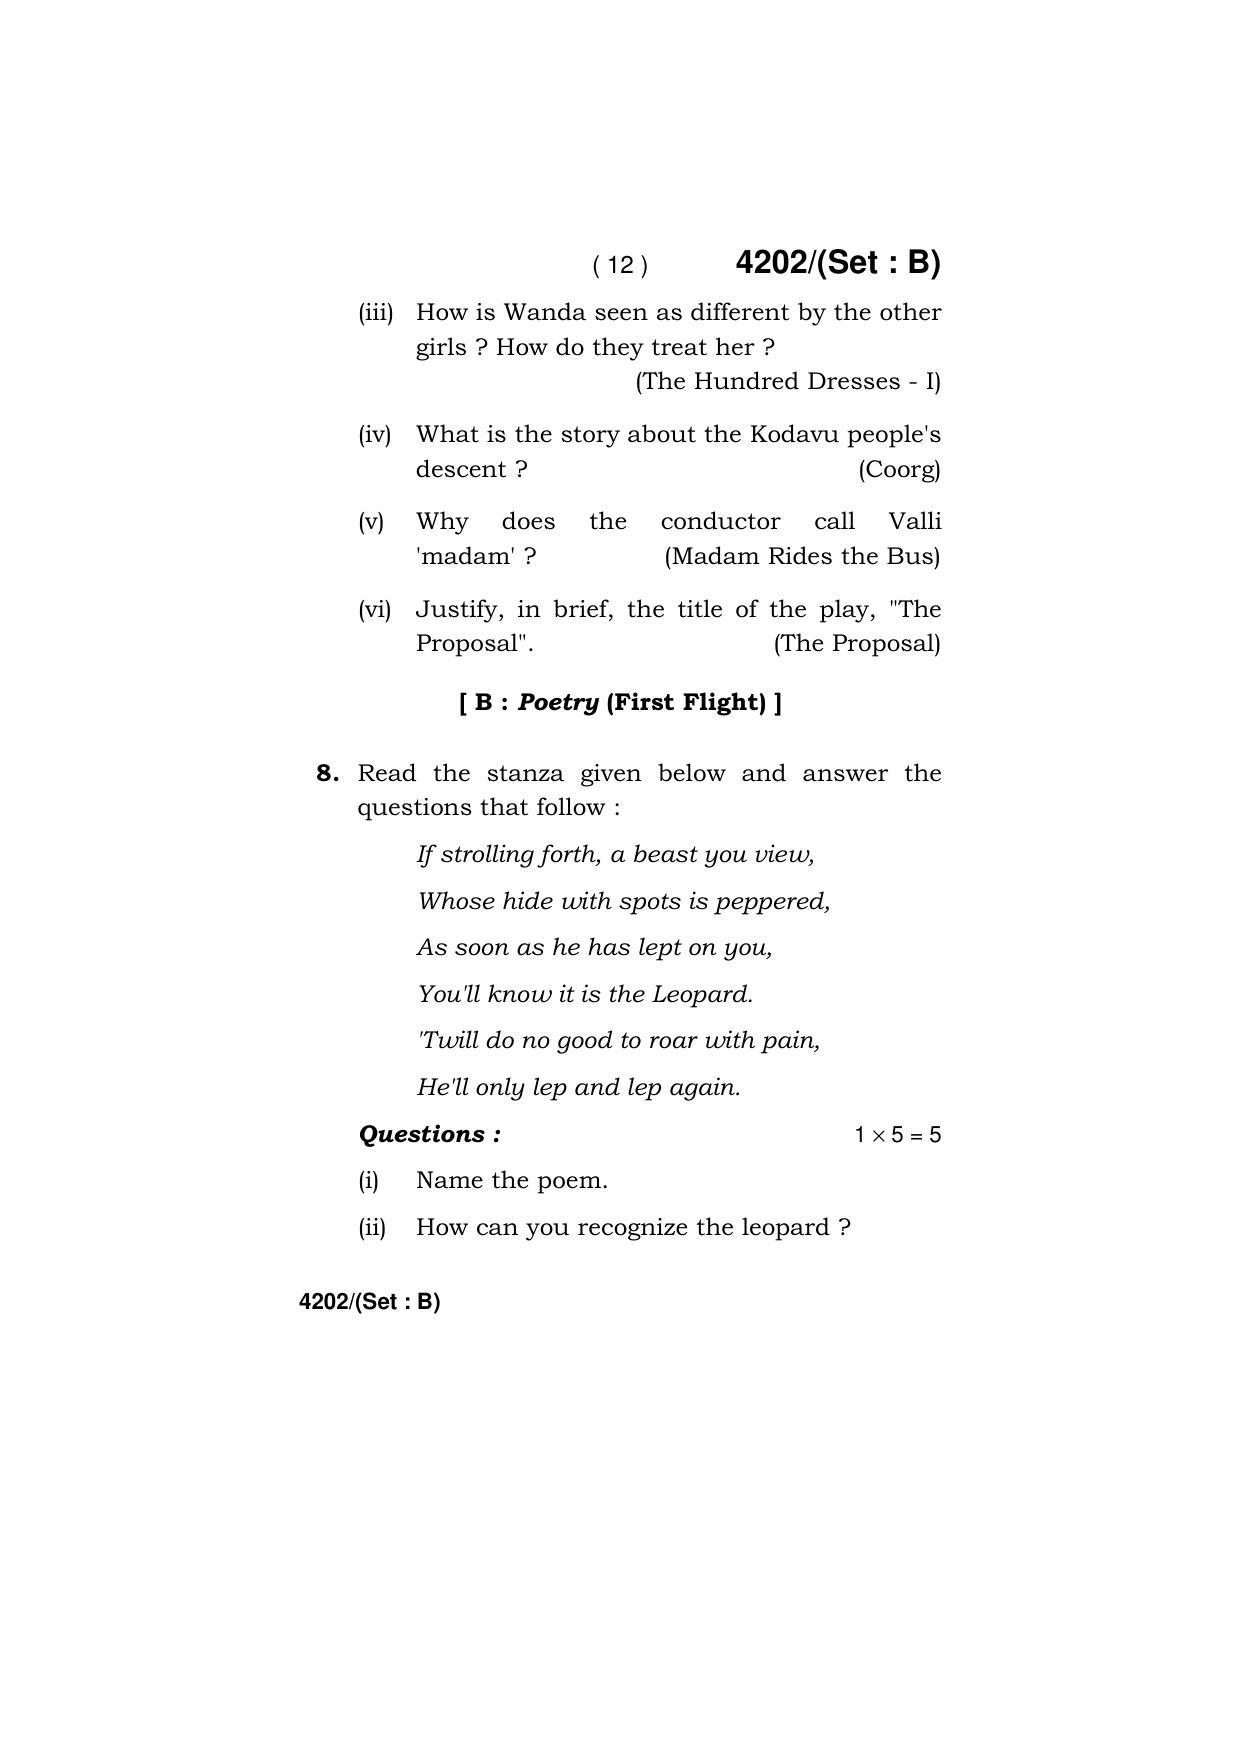 Haryana Board HBSE Class 10 English (All Set) 2019 Question Paper - Page 28